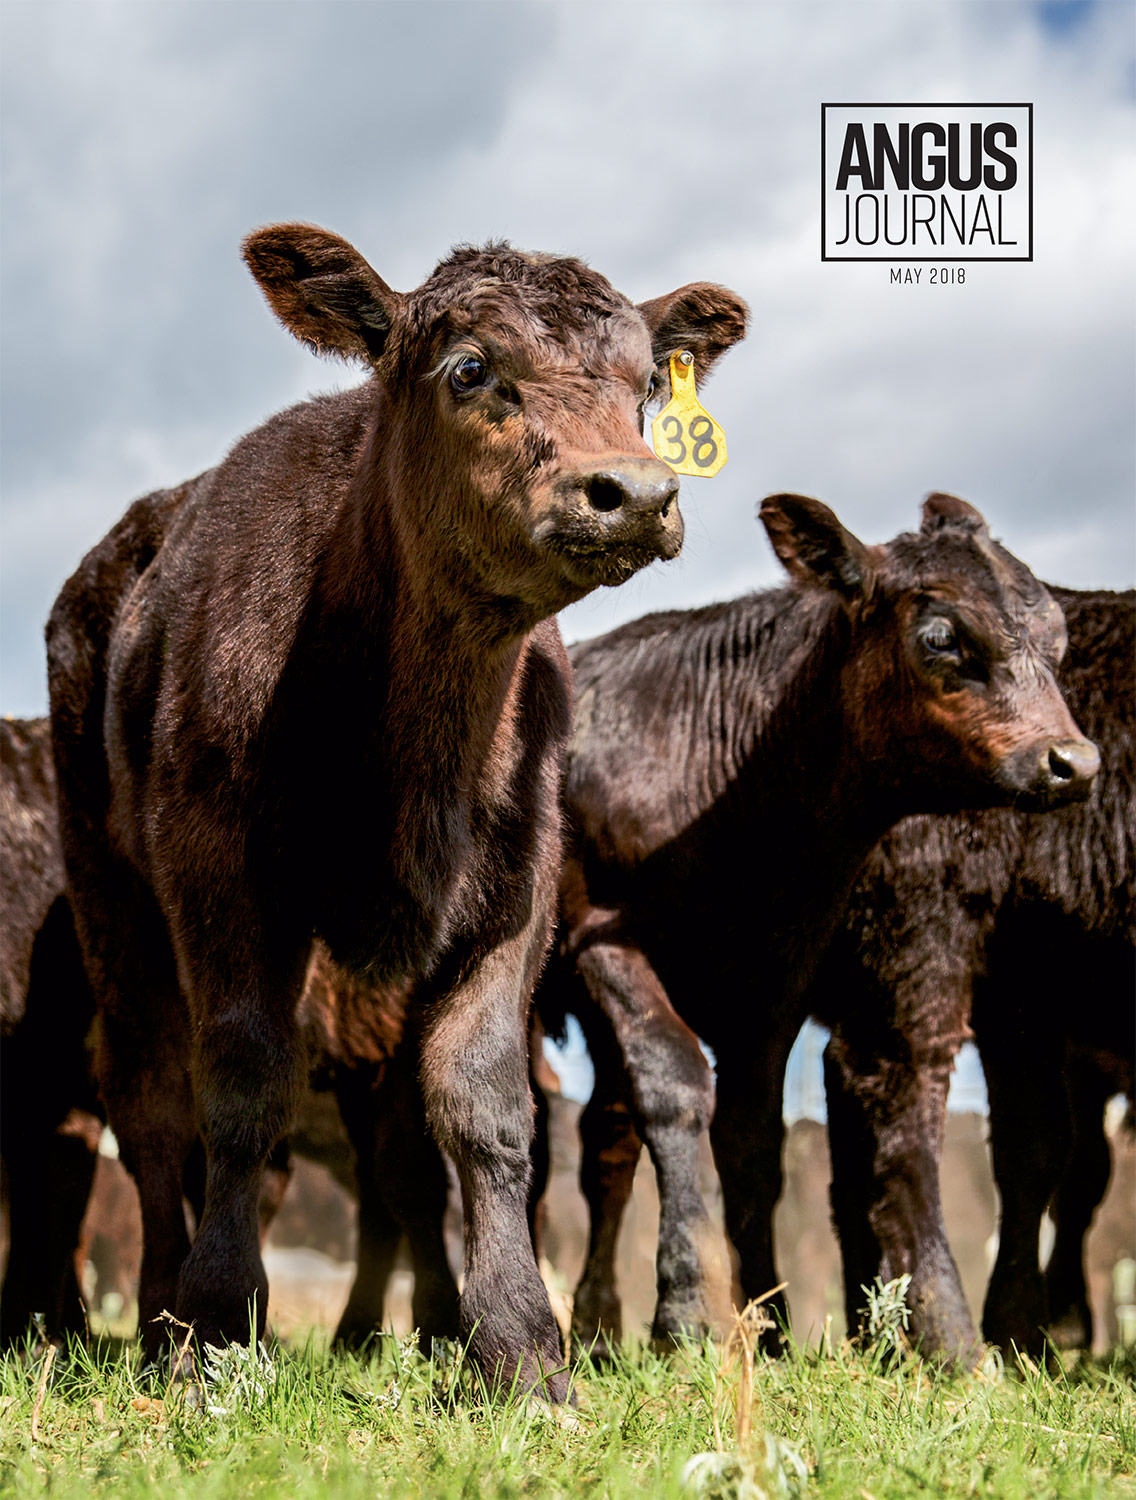 Beef Cattle Stock Images Published on Cover of Angus Journal Magazine